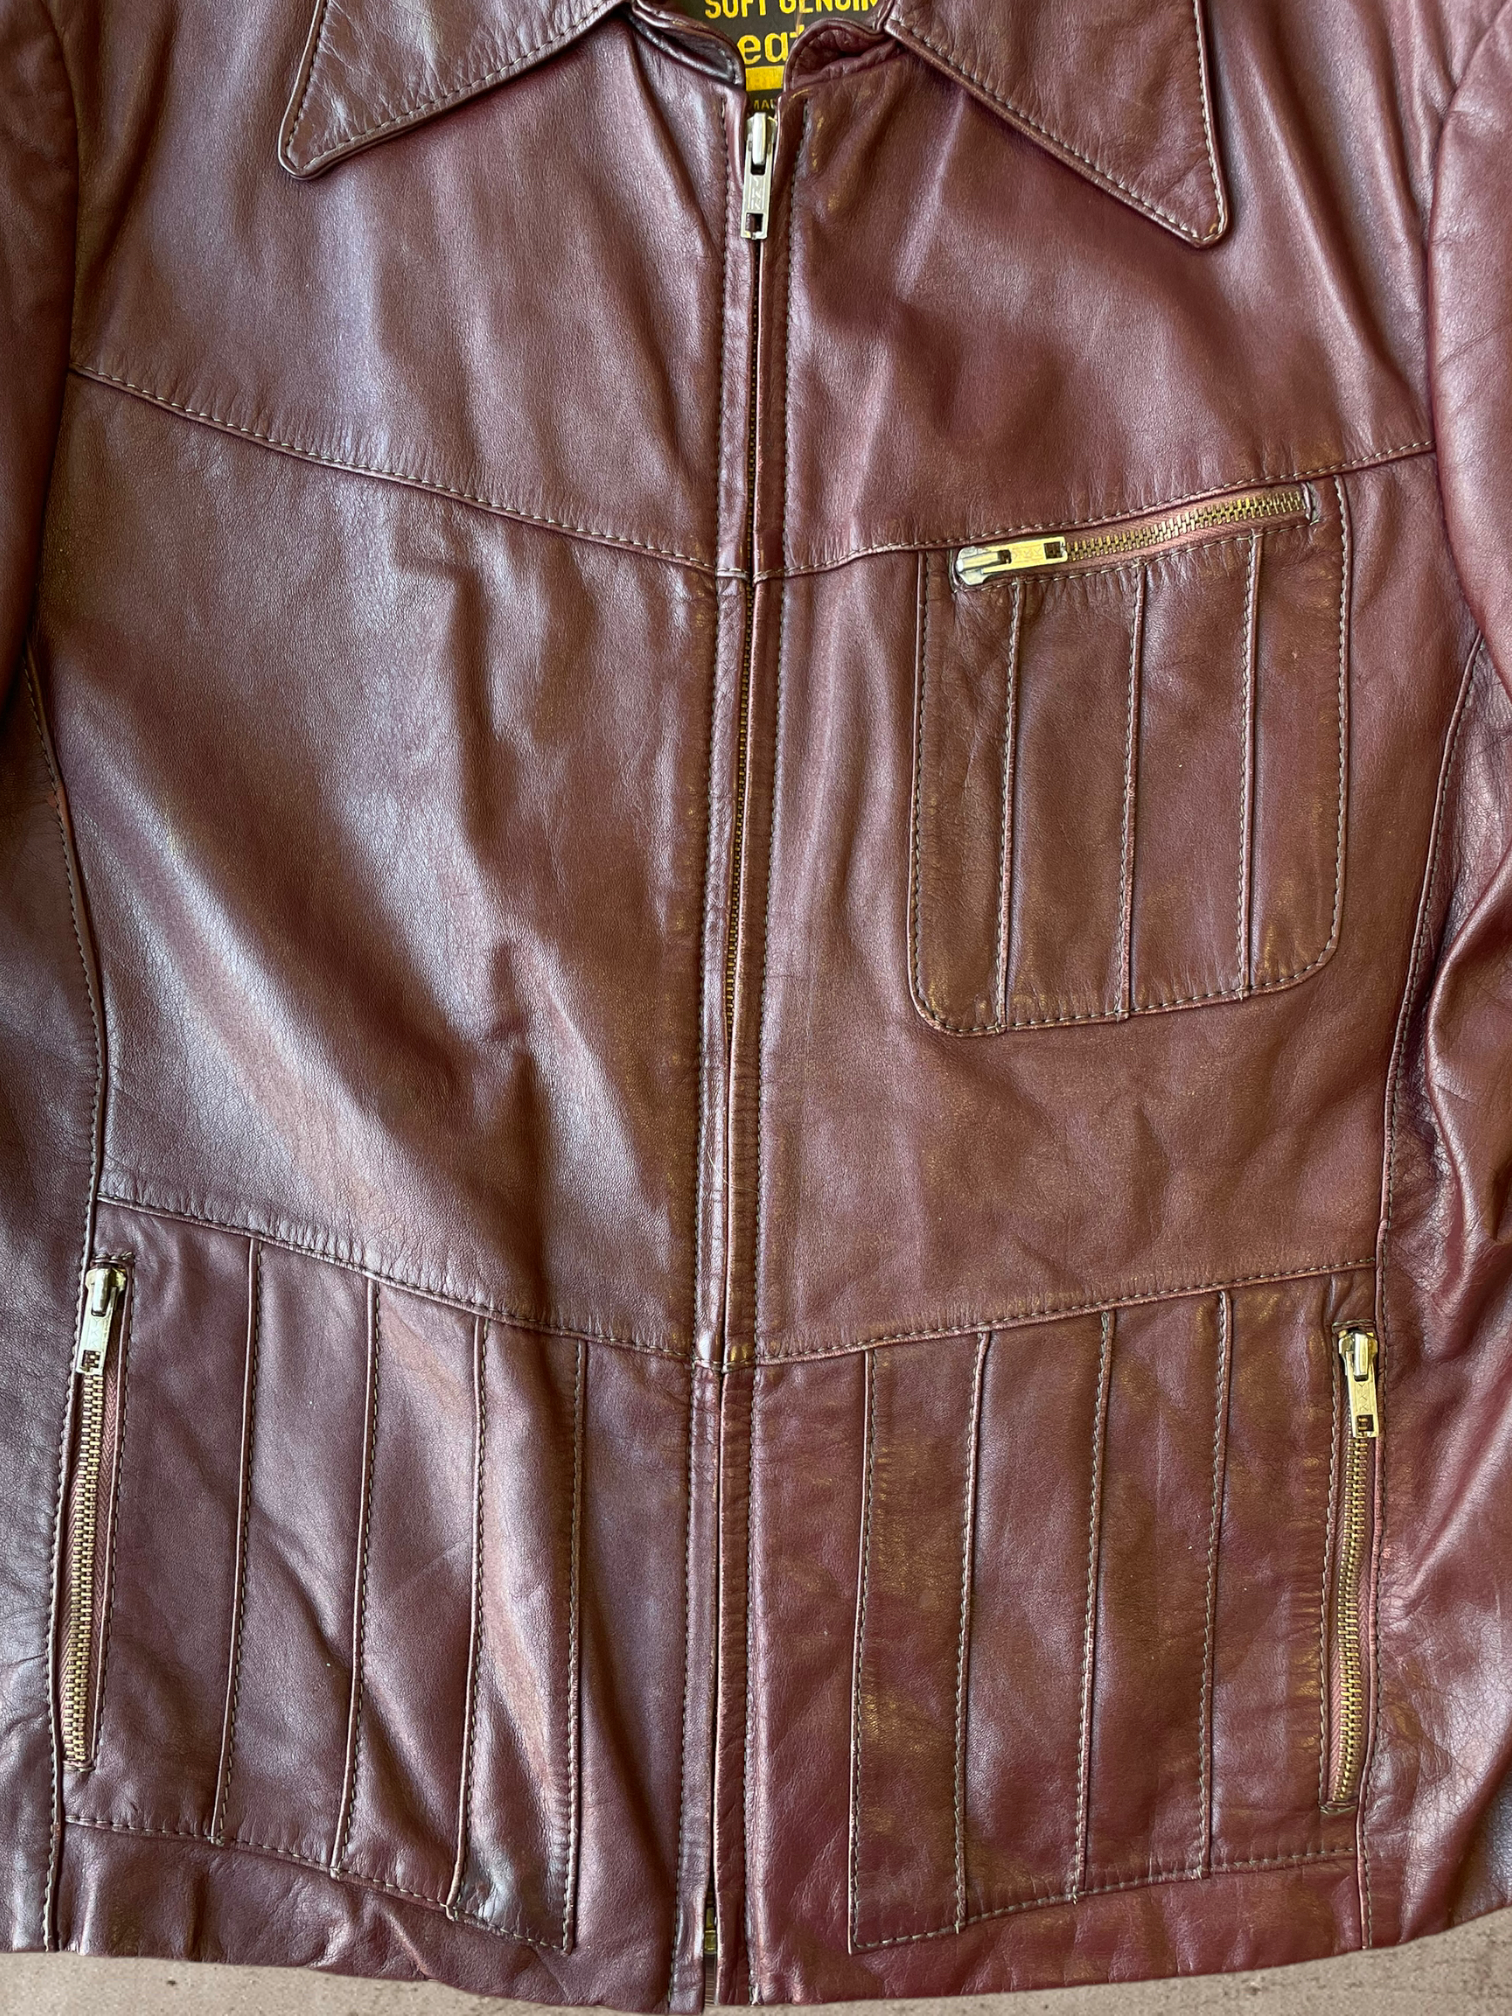 70s/80s Cowhide Leather Jacket - Large